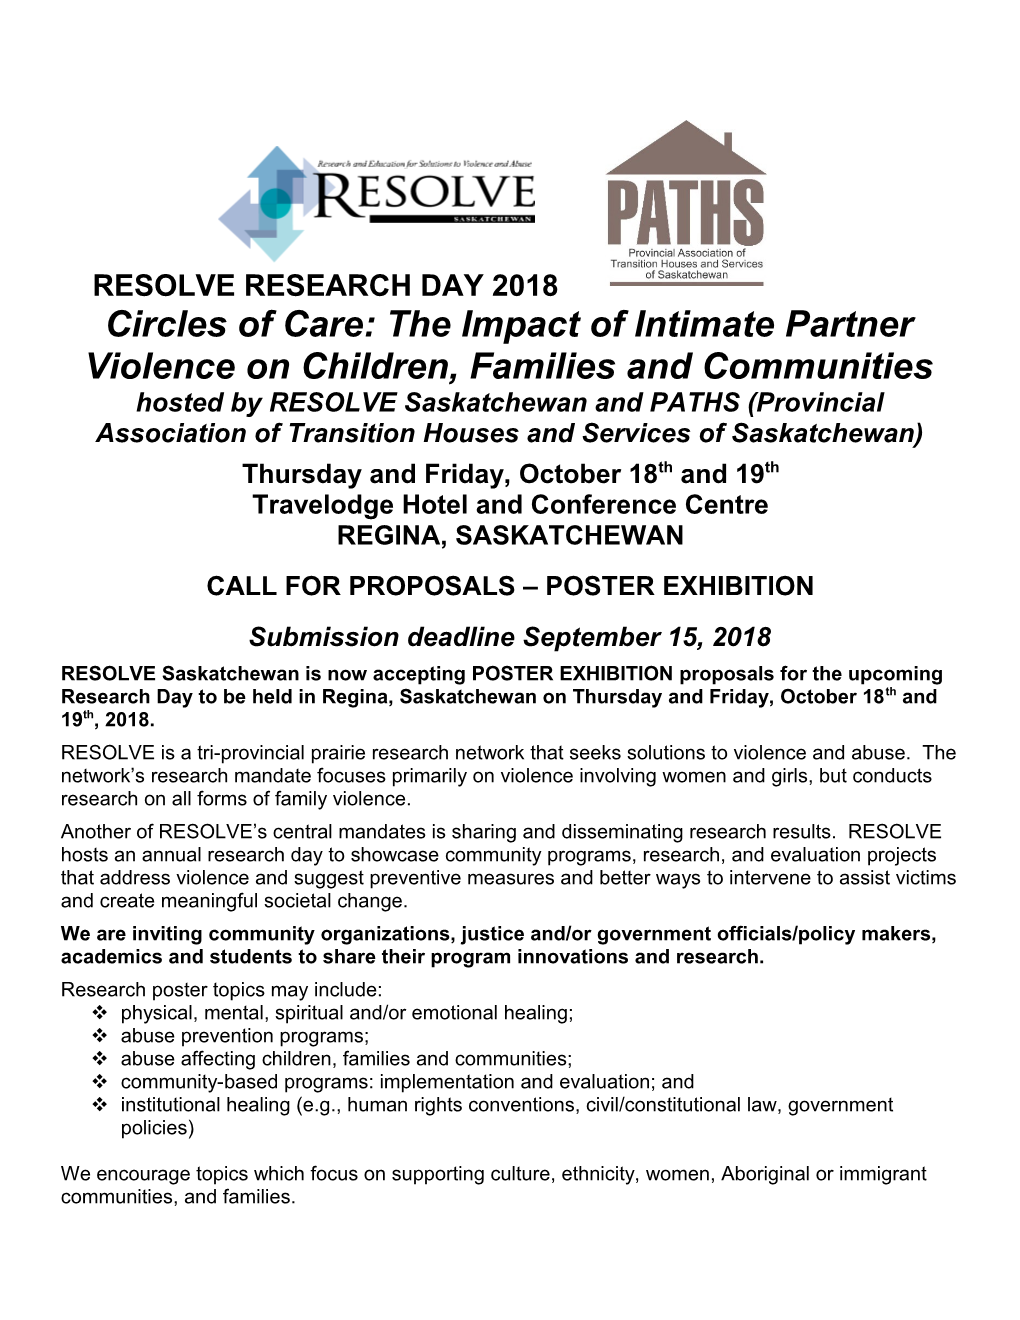 Circles of Care: the Impact of Intimate Partner Violence on Children, Families and Communities